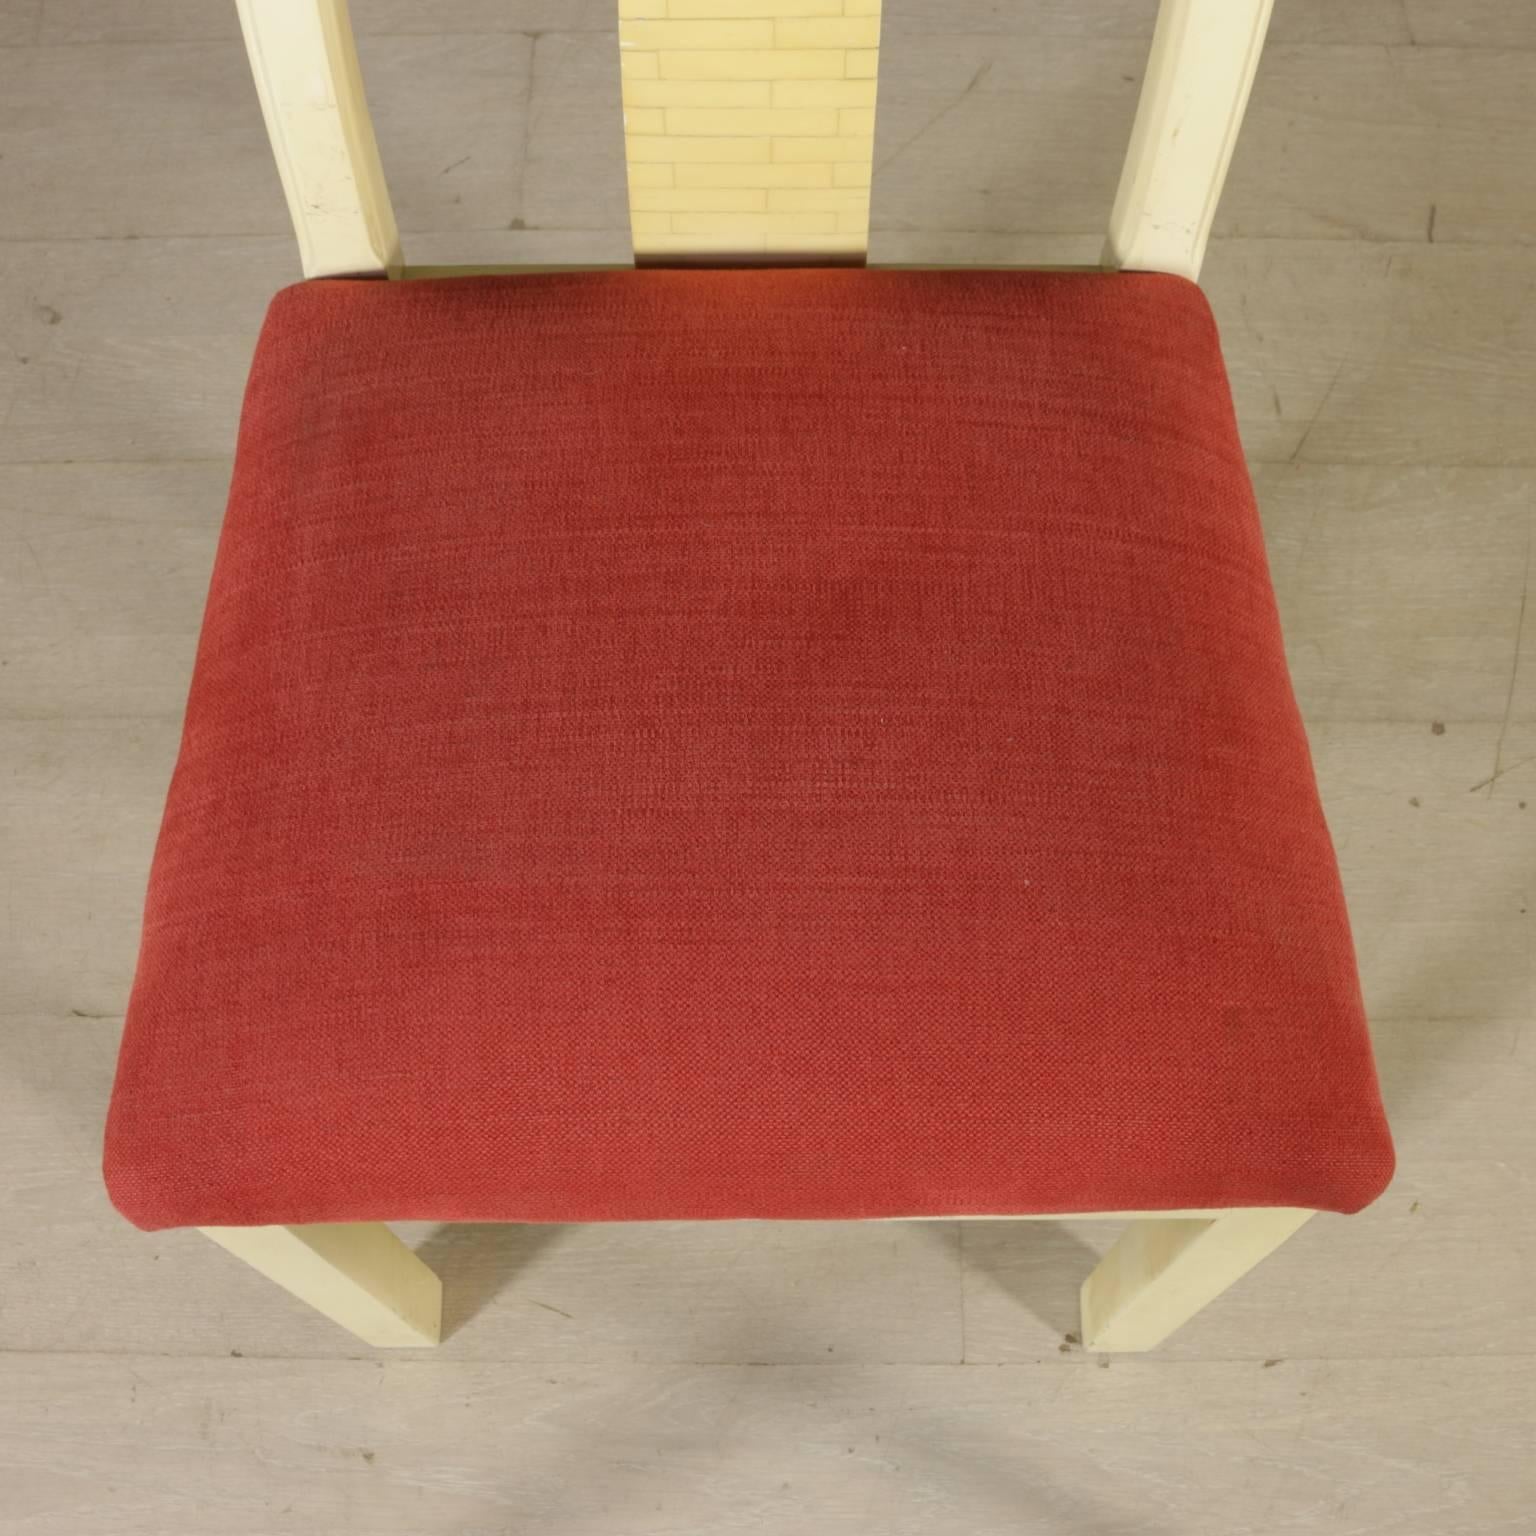 Mid-Century Modern Group of 4 Chairs Wood Synthetic Material Foam Fabric Vintage, Italy, 1950s